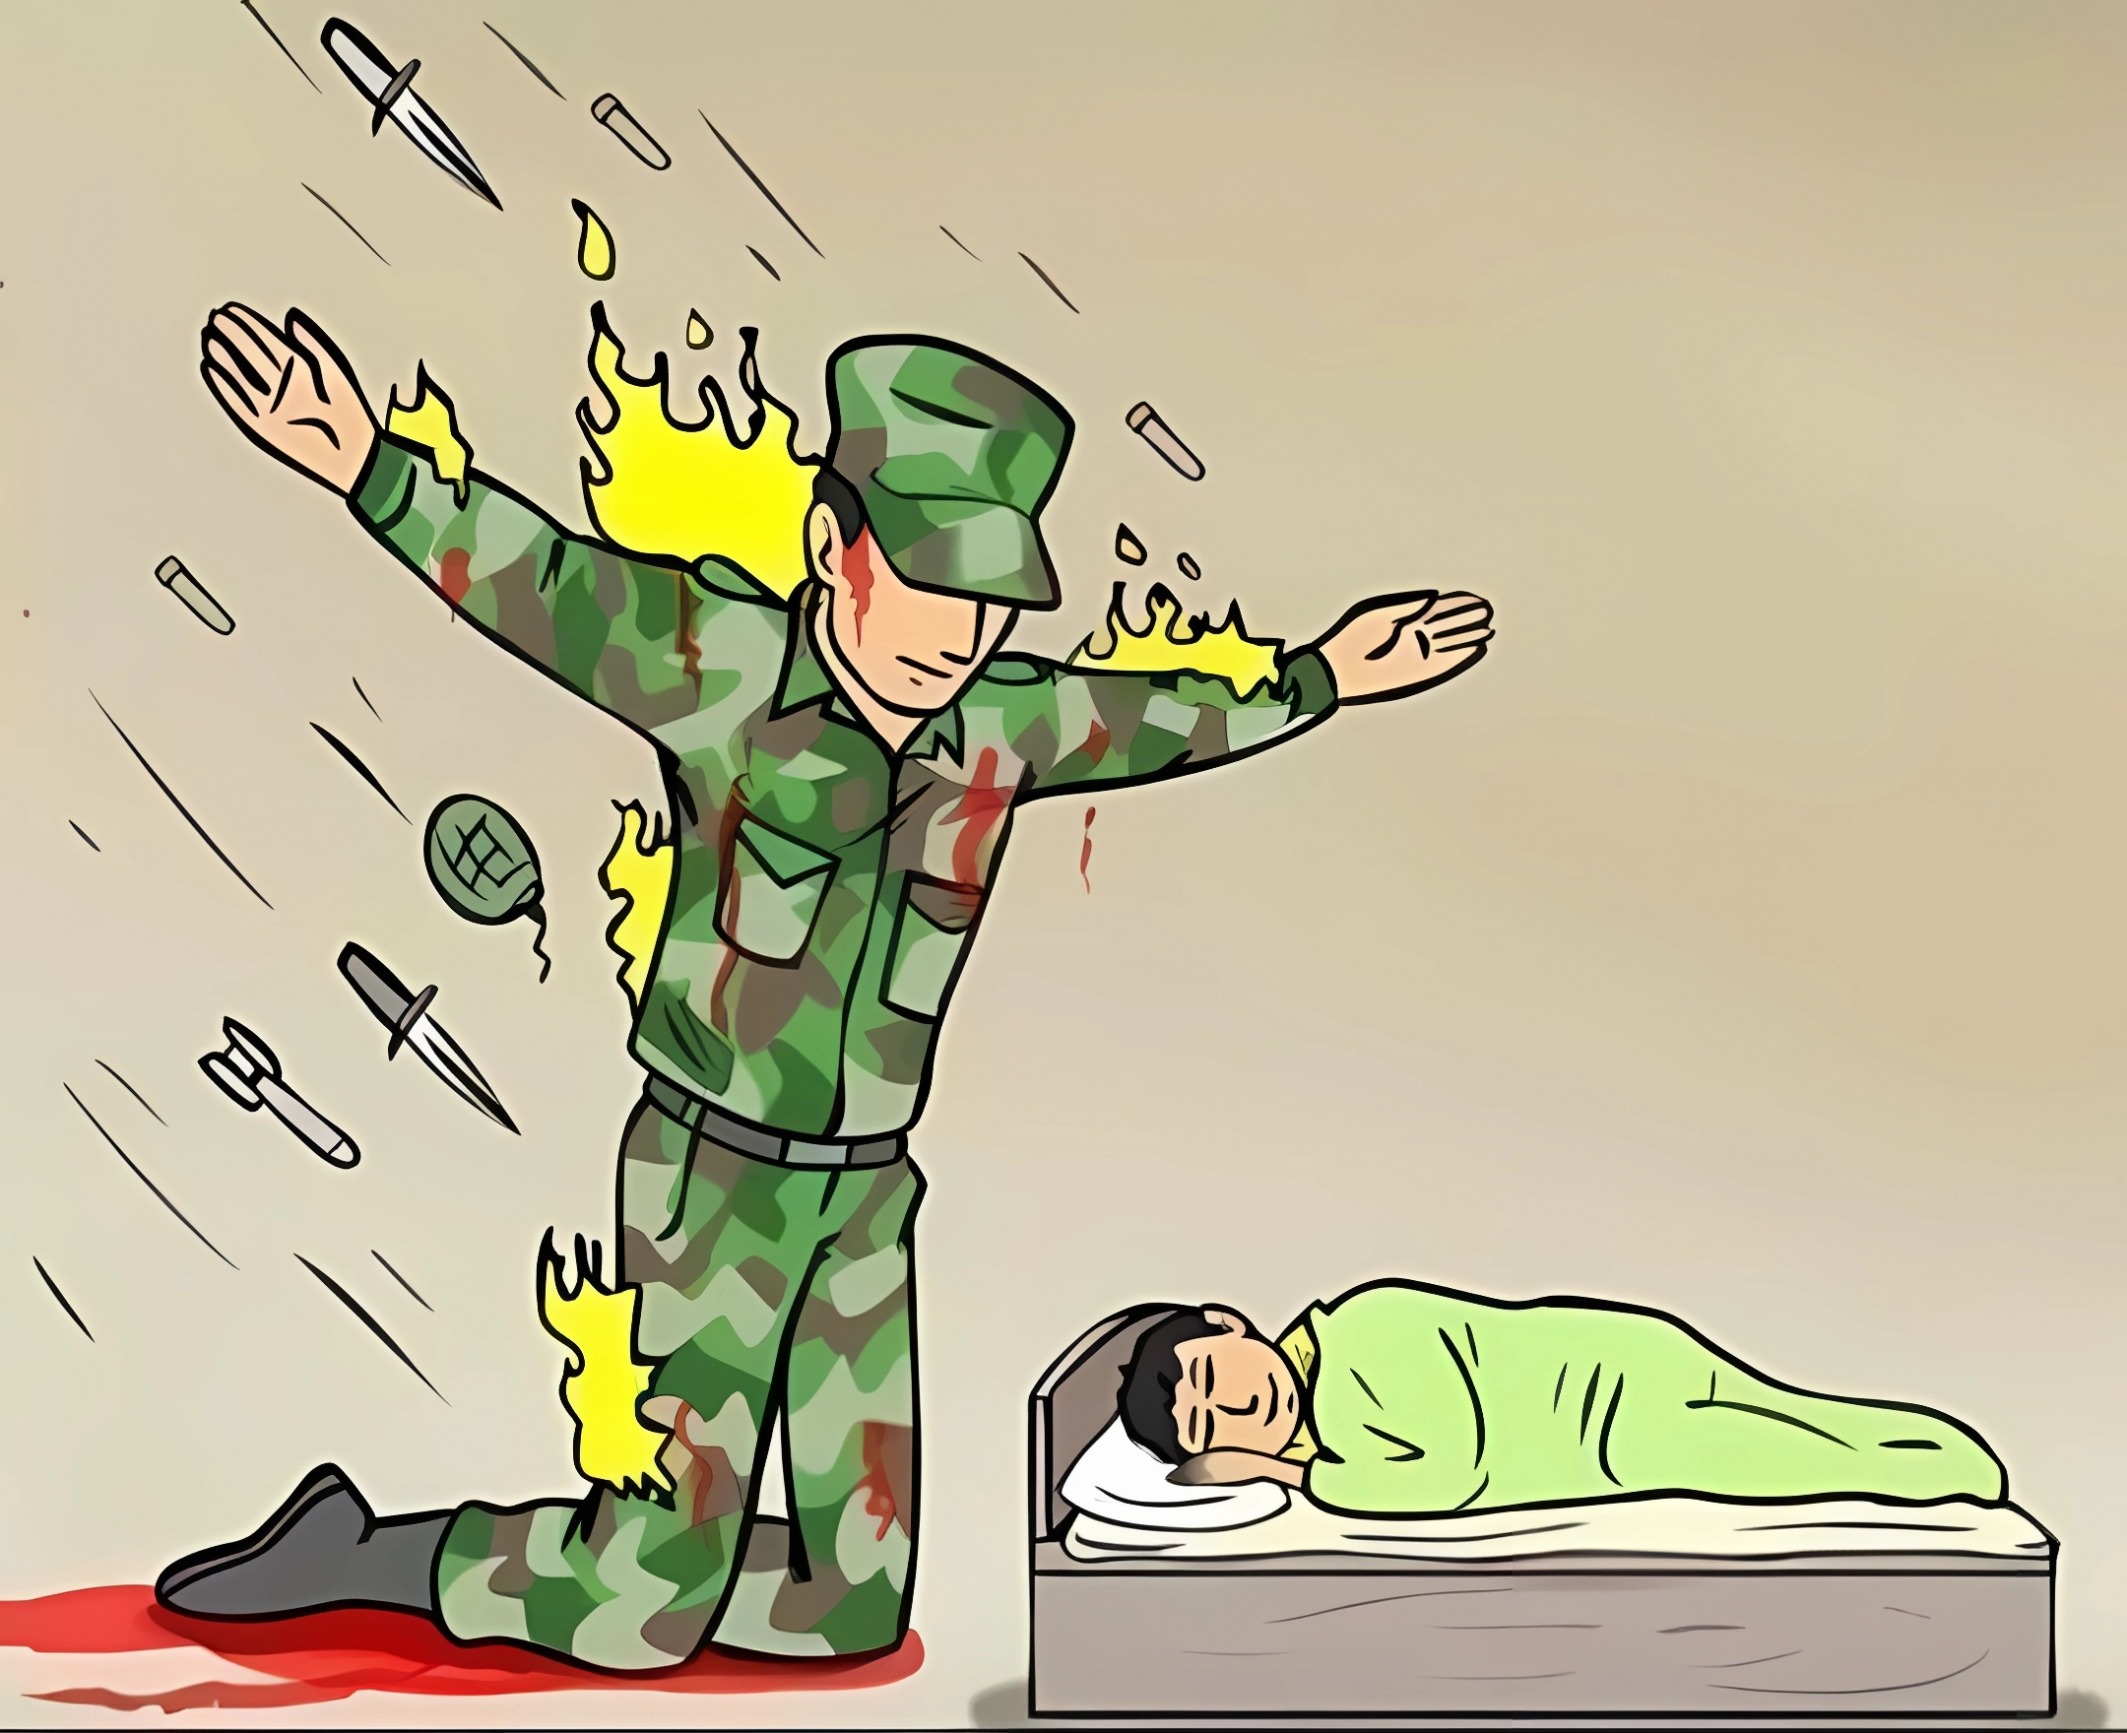 High Quality Soldier protecting sleeping child (HQ) Blank Meme Template